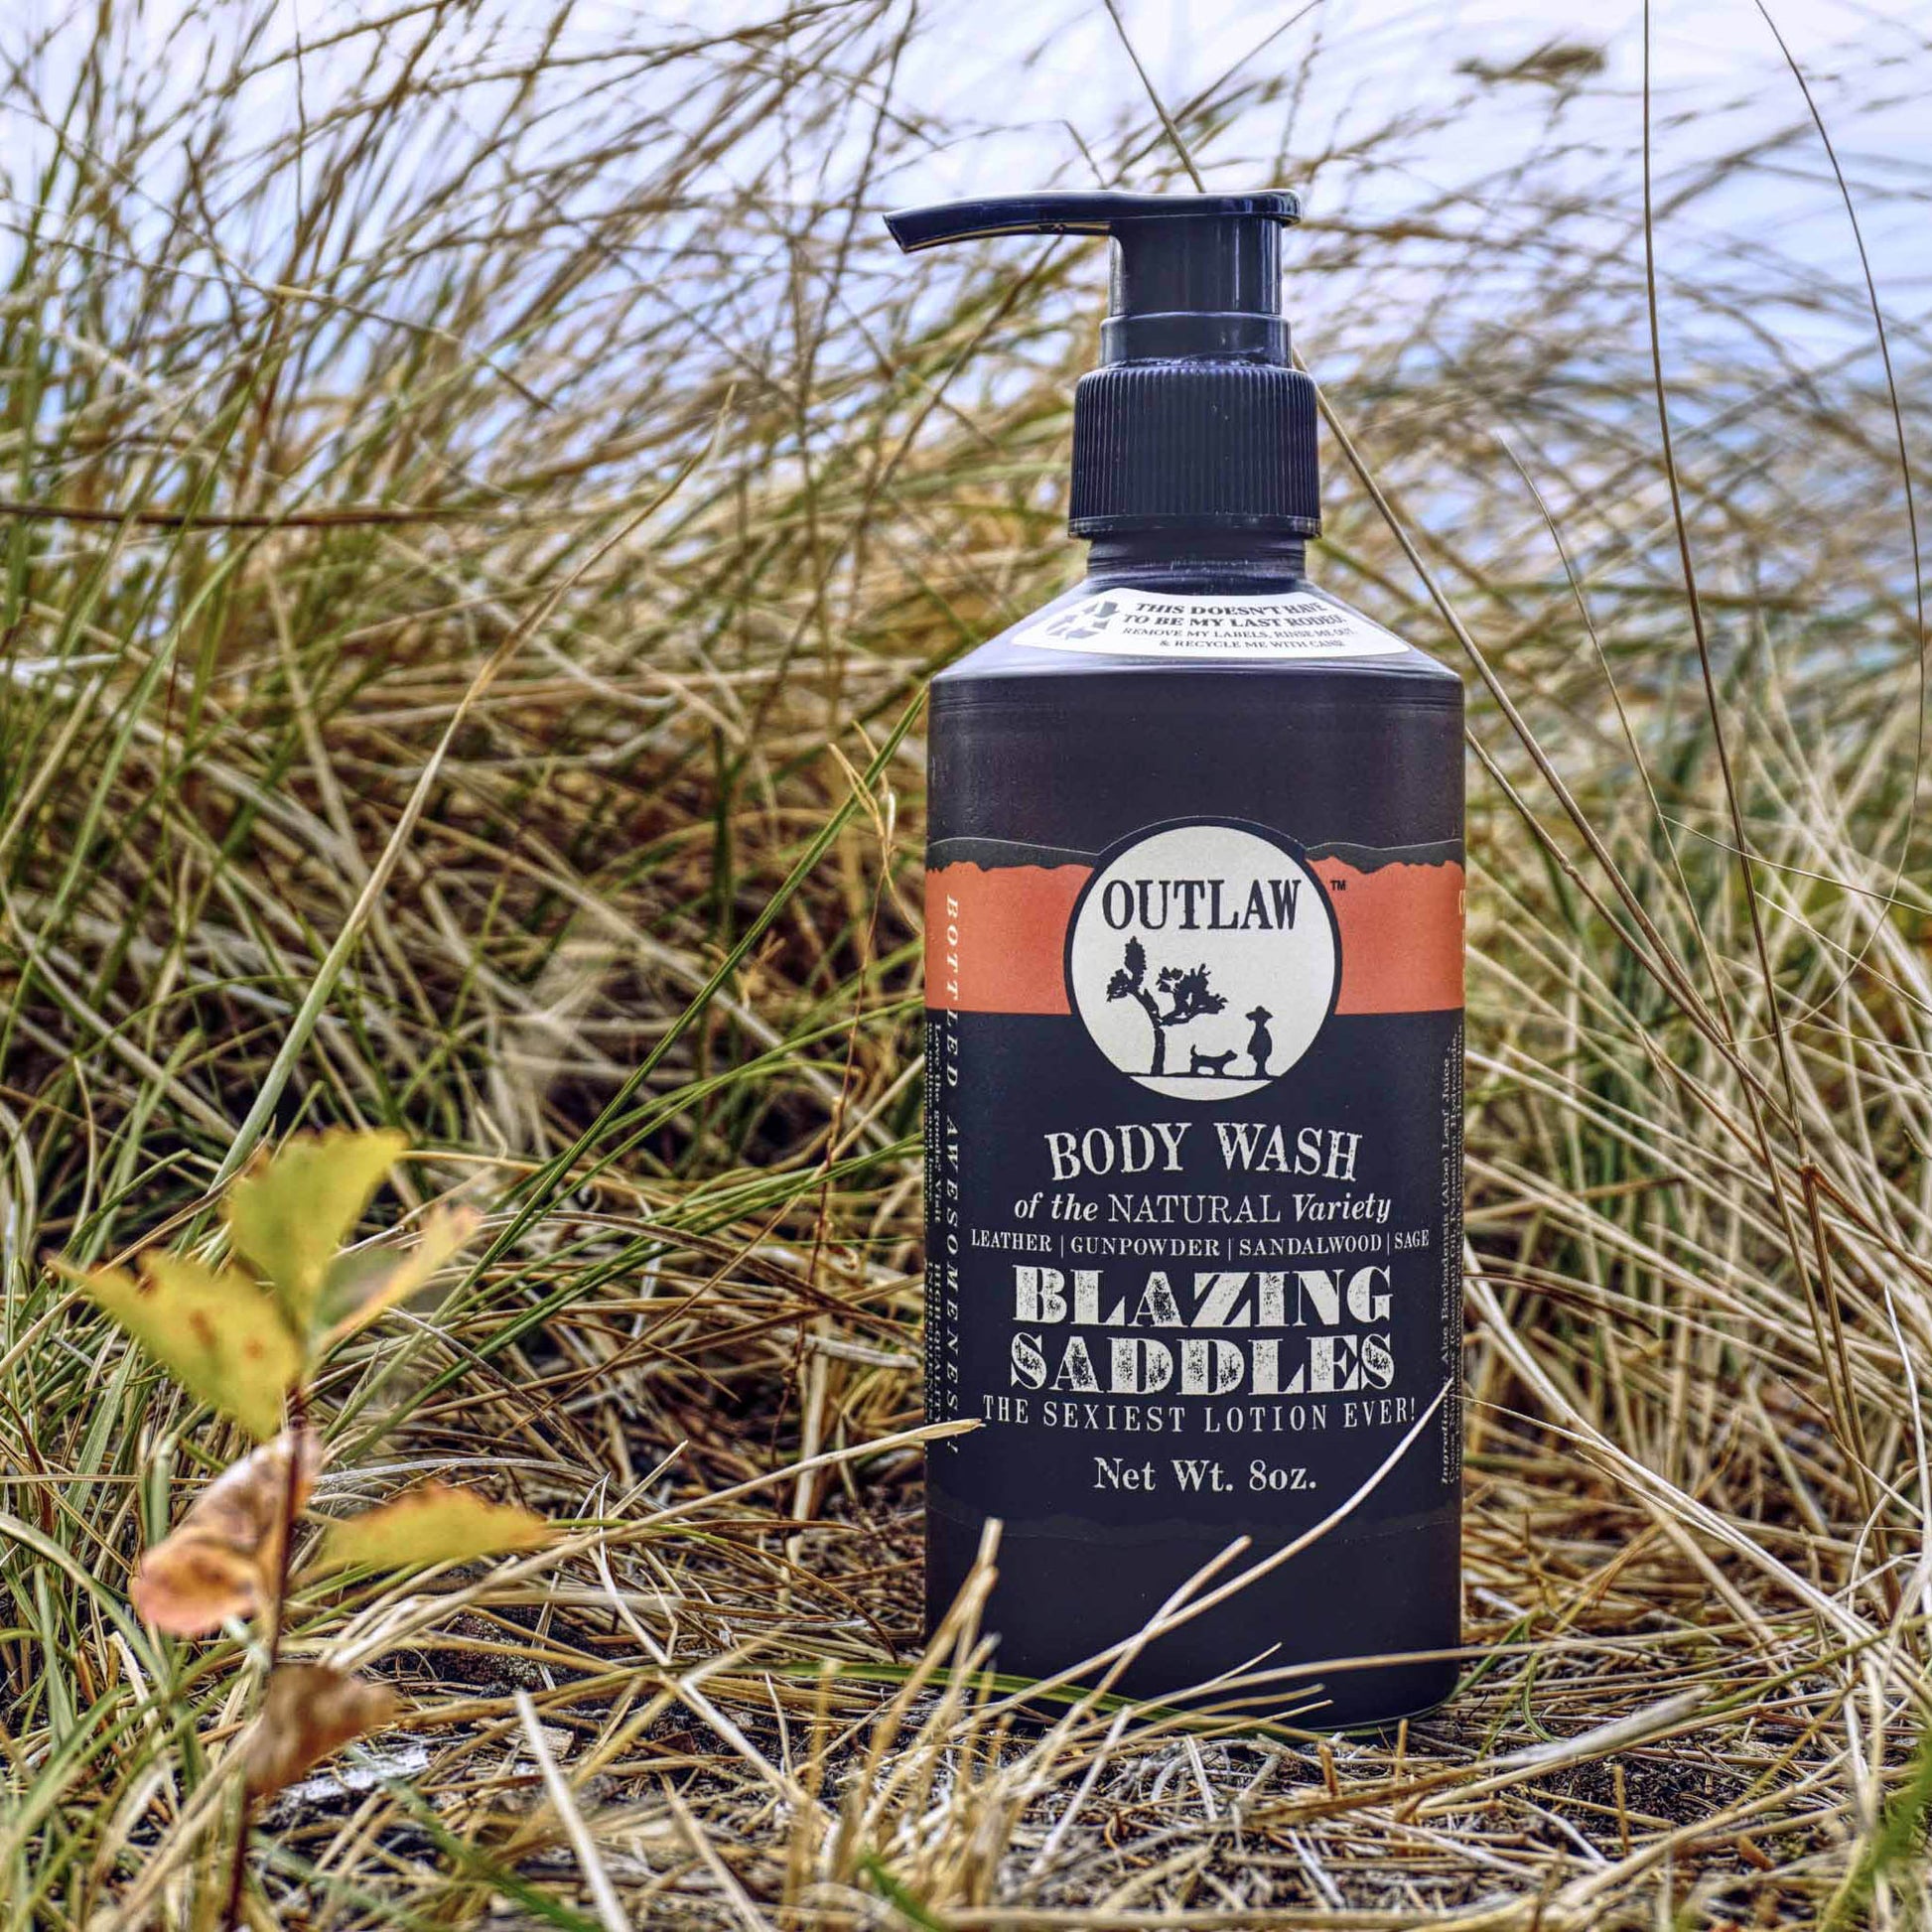 Outlaw natural body wash in Blazing Saddles leather and sage scent